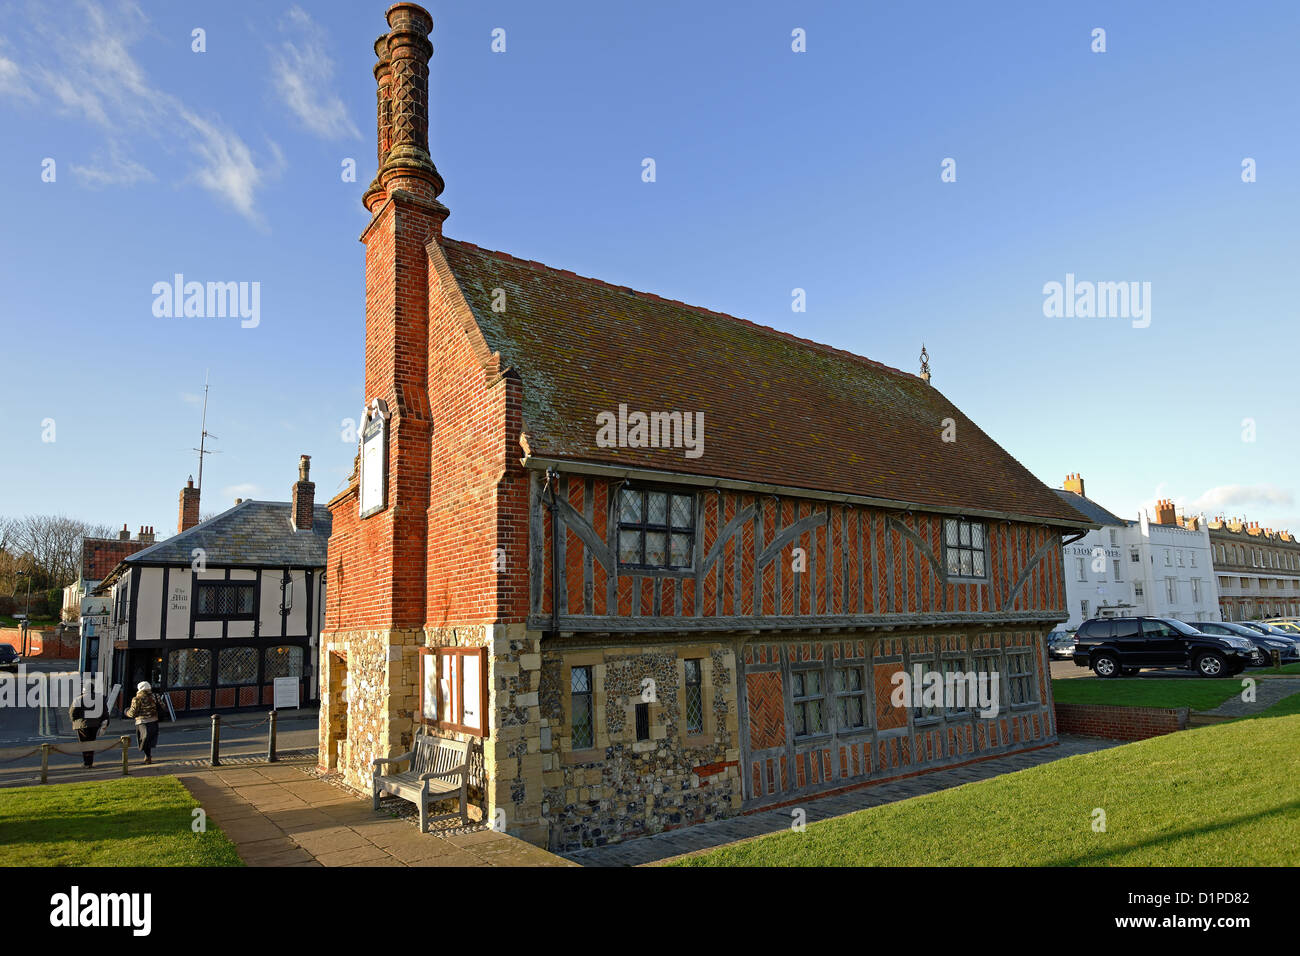 Aldeburgh Moot Hall,Suffolk,UK - a timber framed town hall dating from the 16th and 17th centuries. Stock Photo